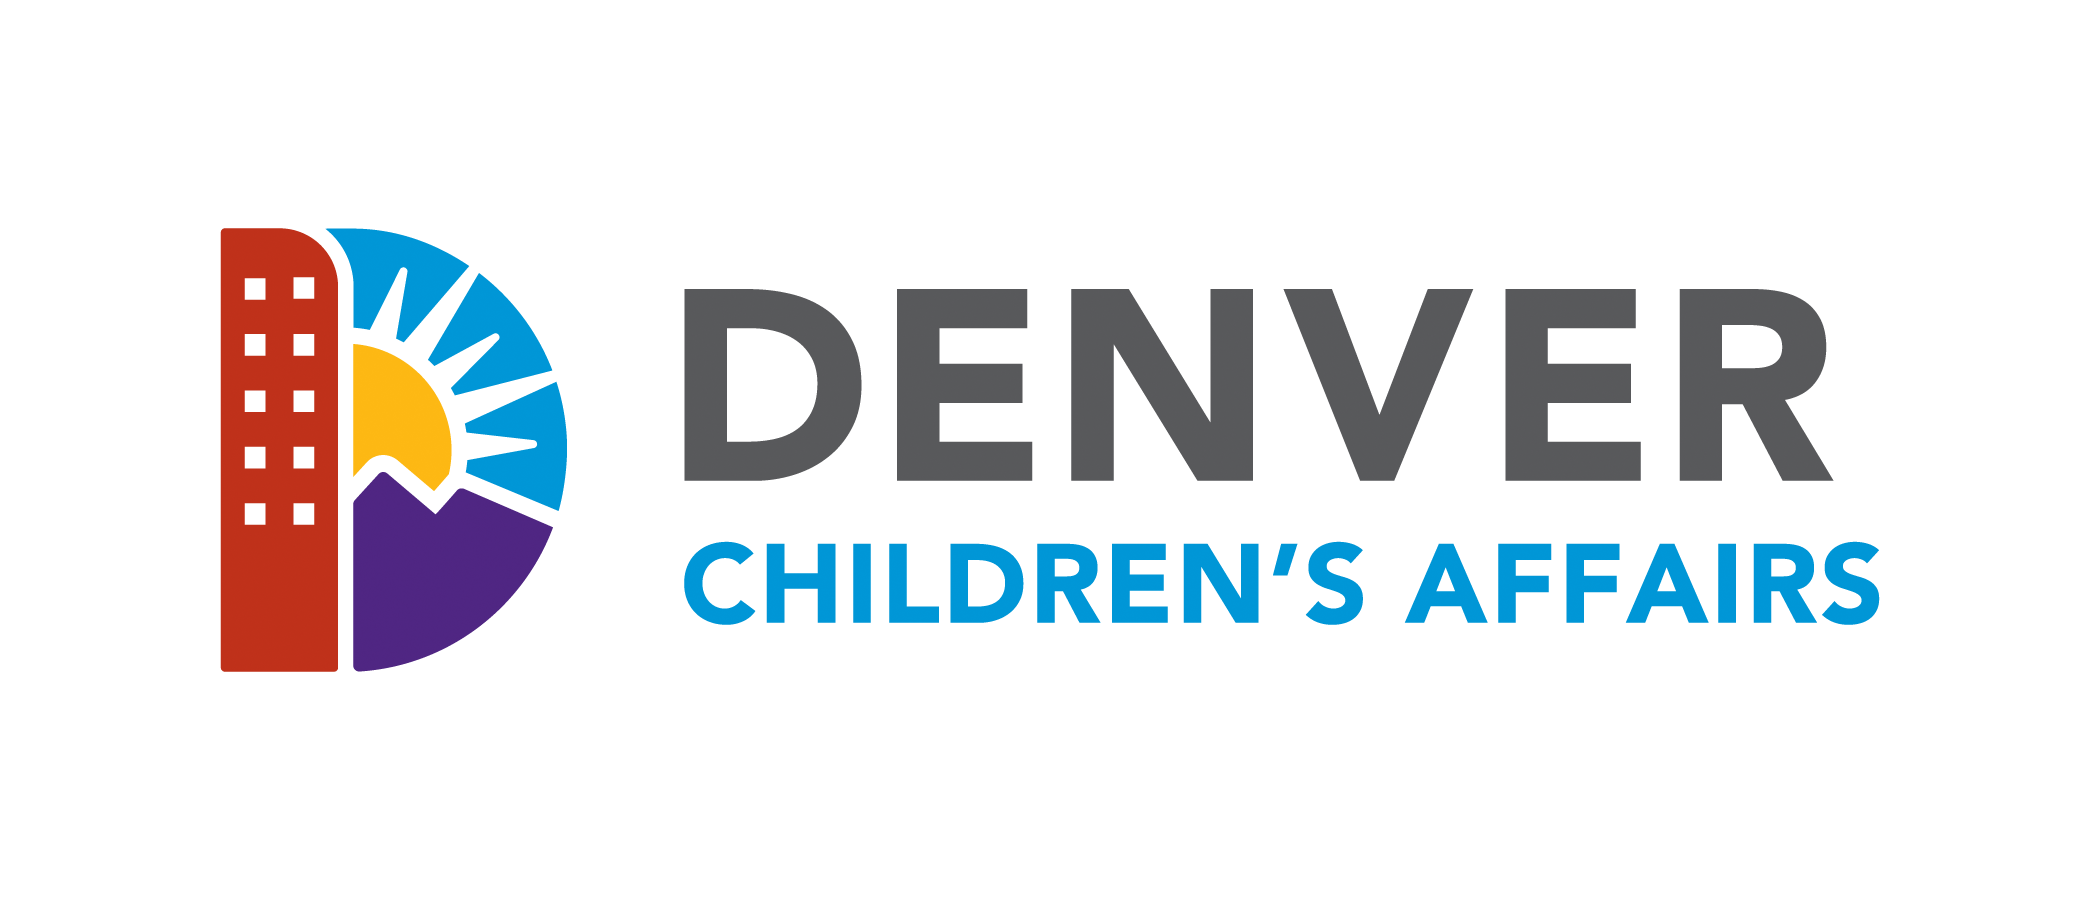 Organization logo of City and County of Denver Office of Children's Affairs